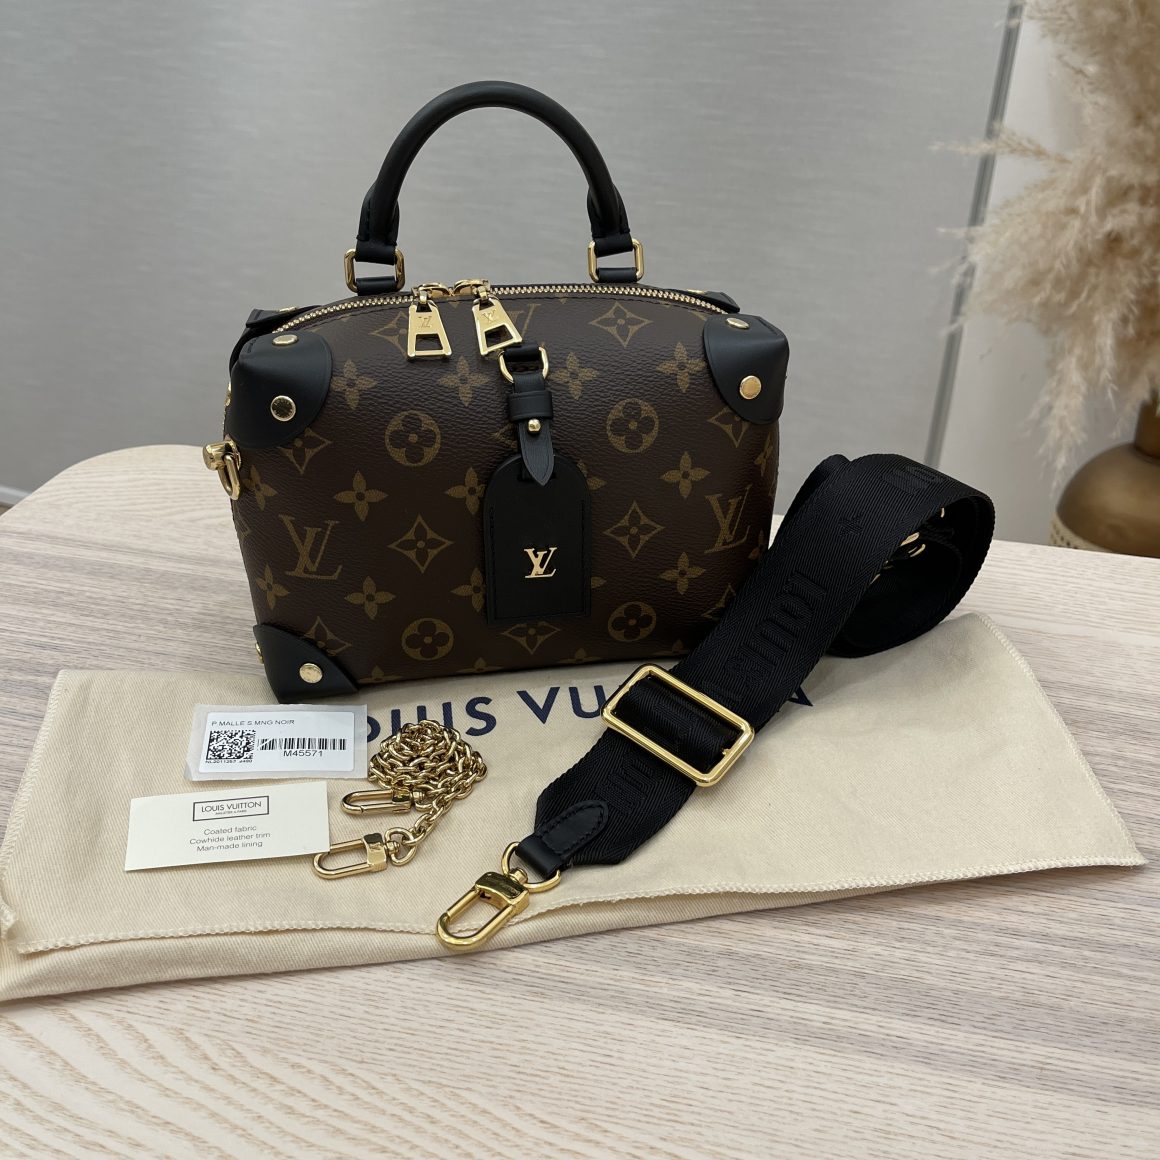 Authentic Louis Vuitton Preowned Monogram Studded Petite Malle